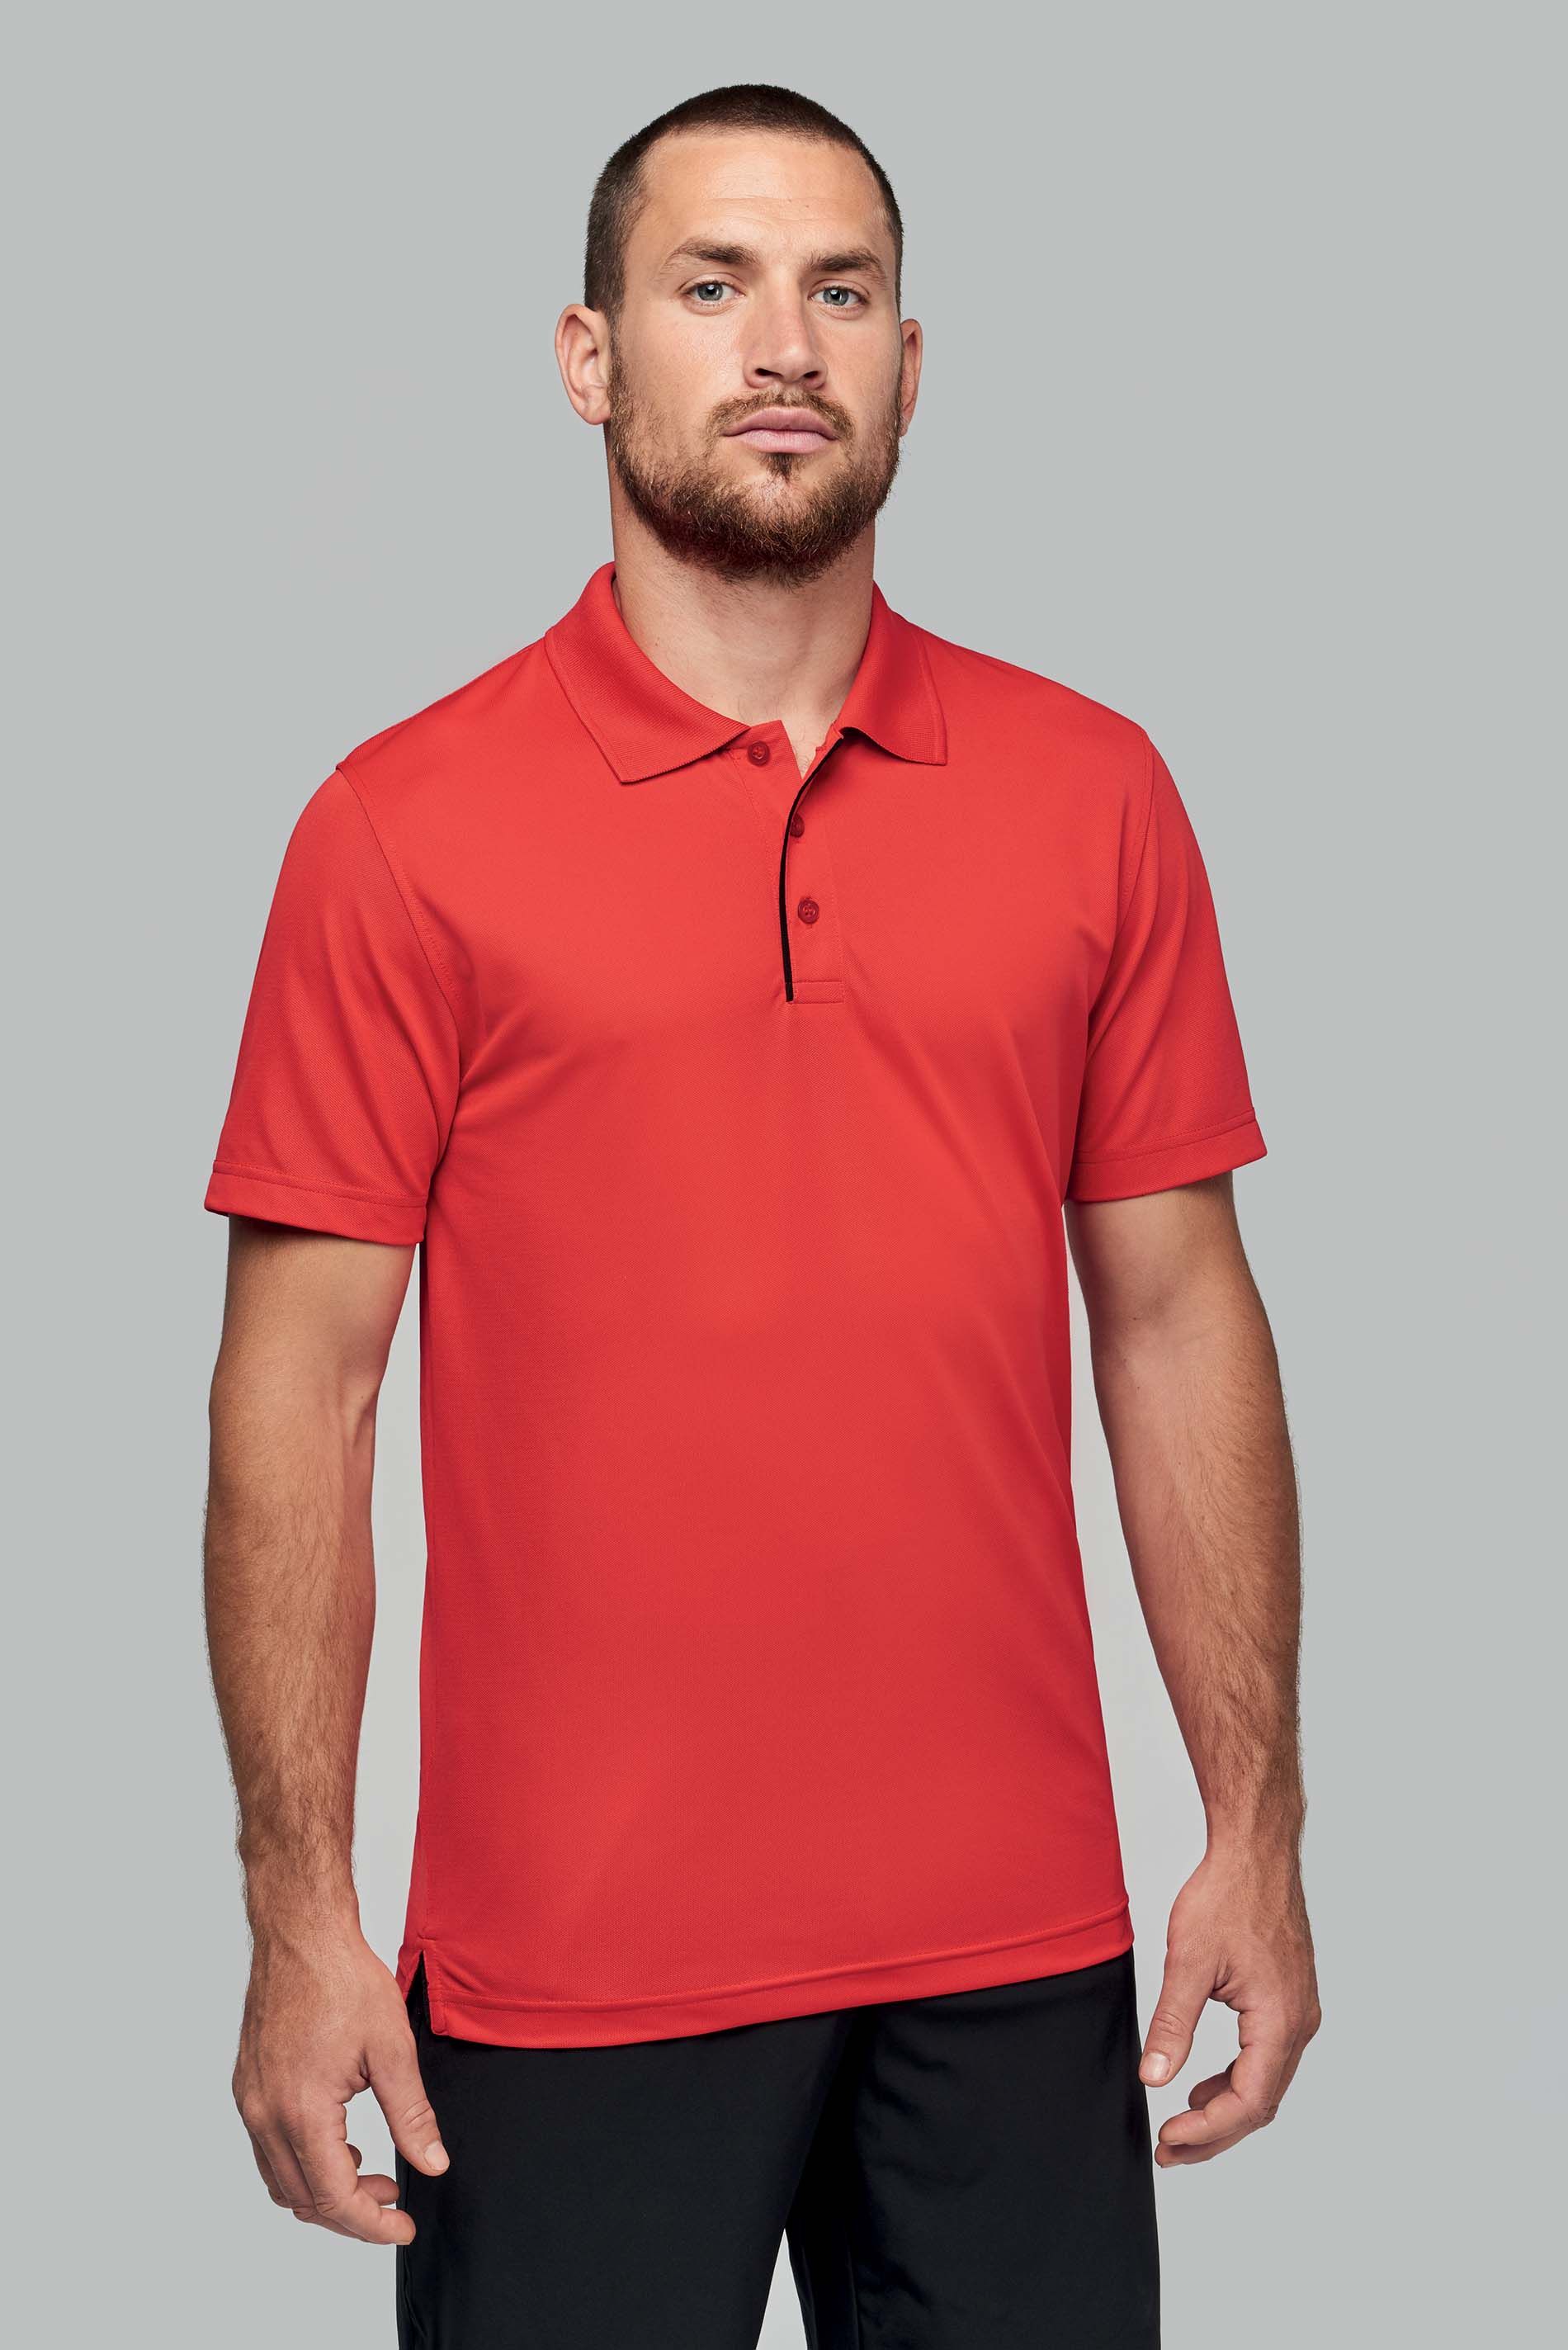 Polo maille piquée sport manches courtes PA485 - Red